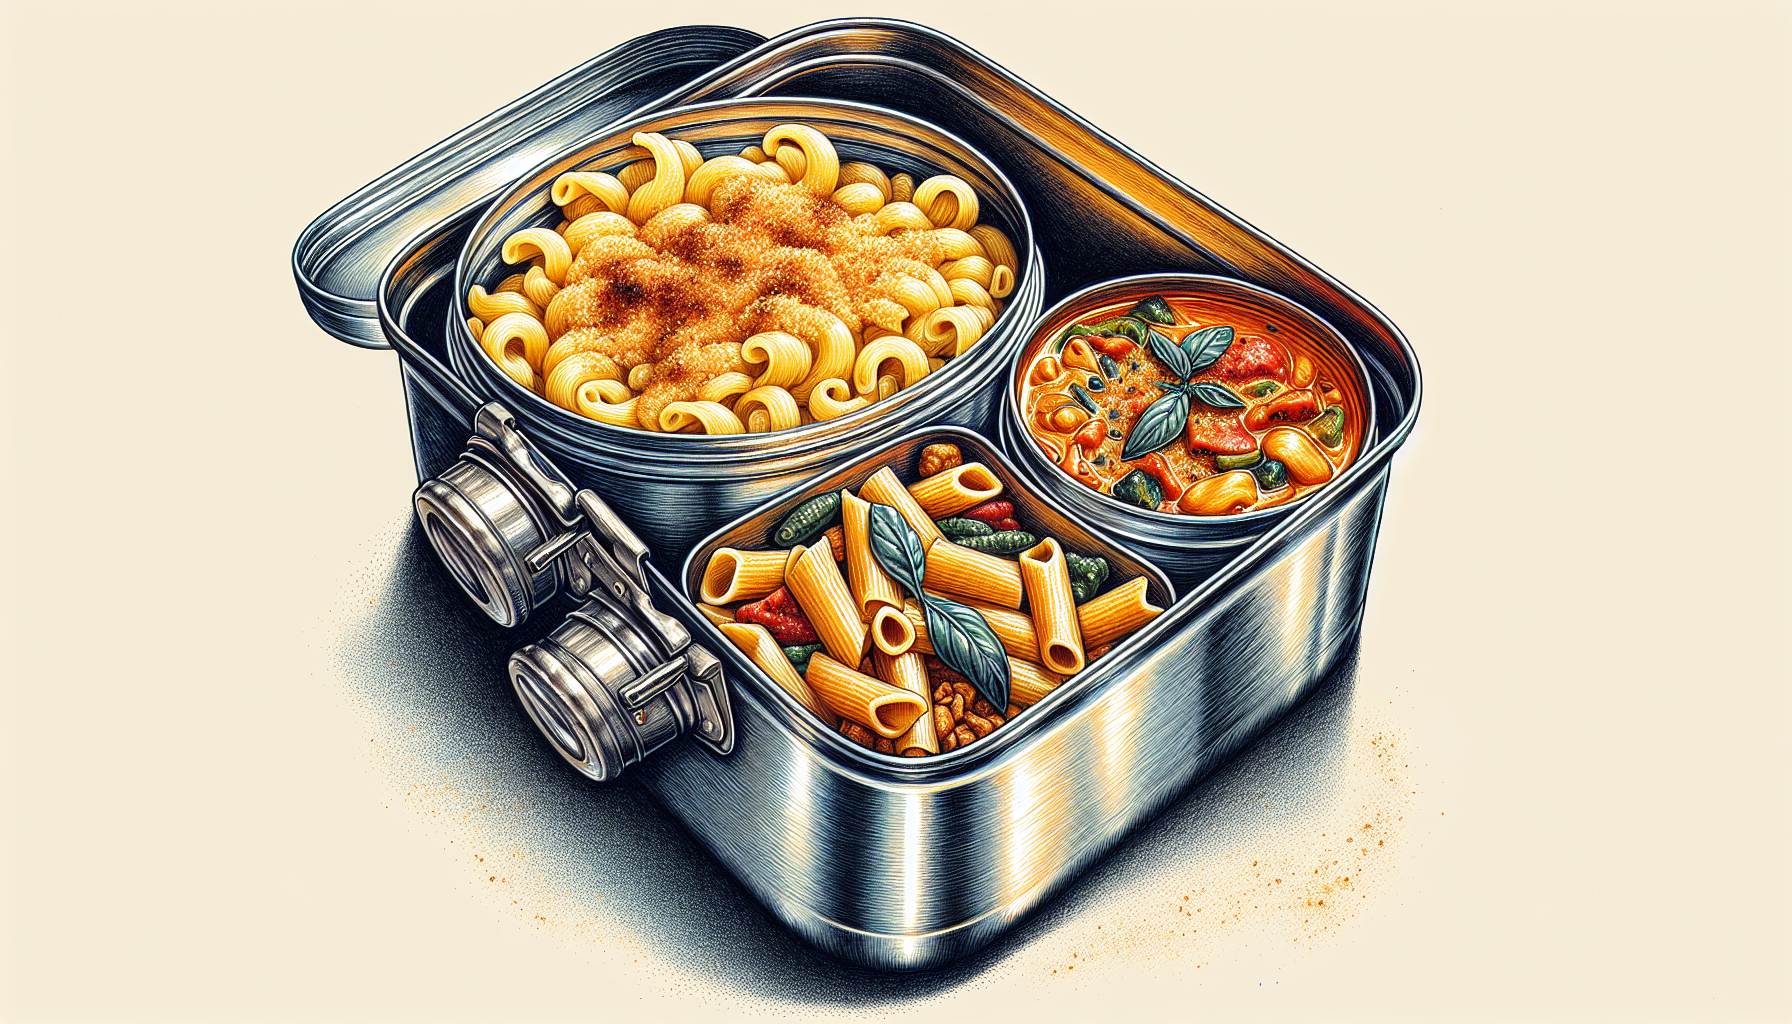 Thermos with warm, comforting food